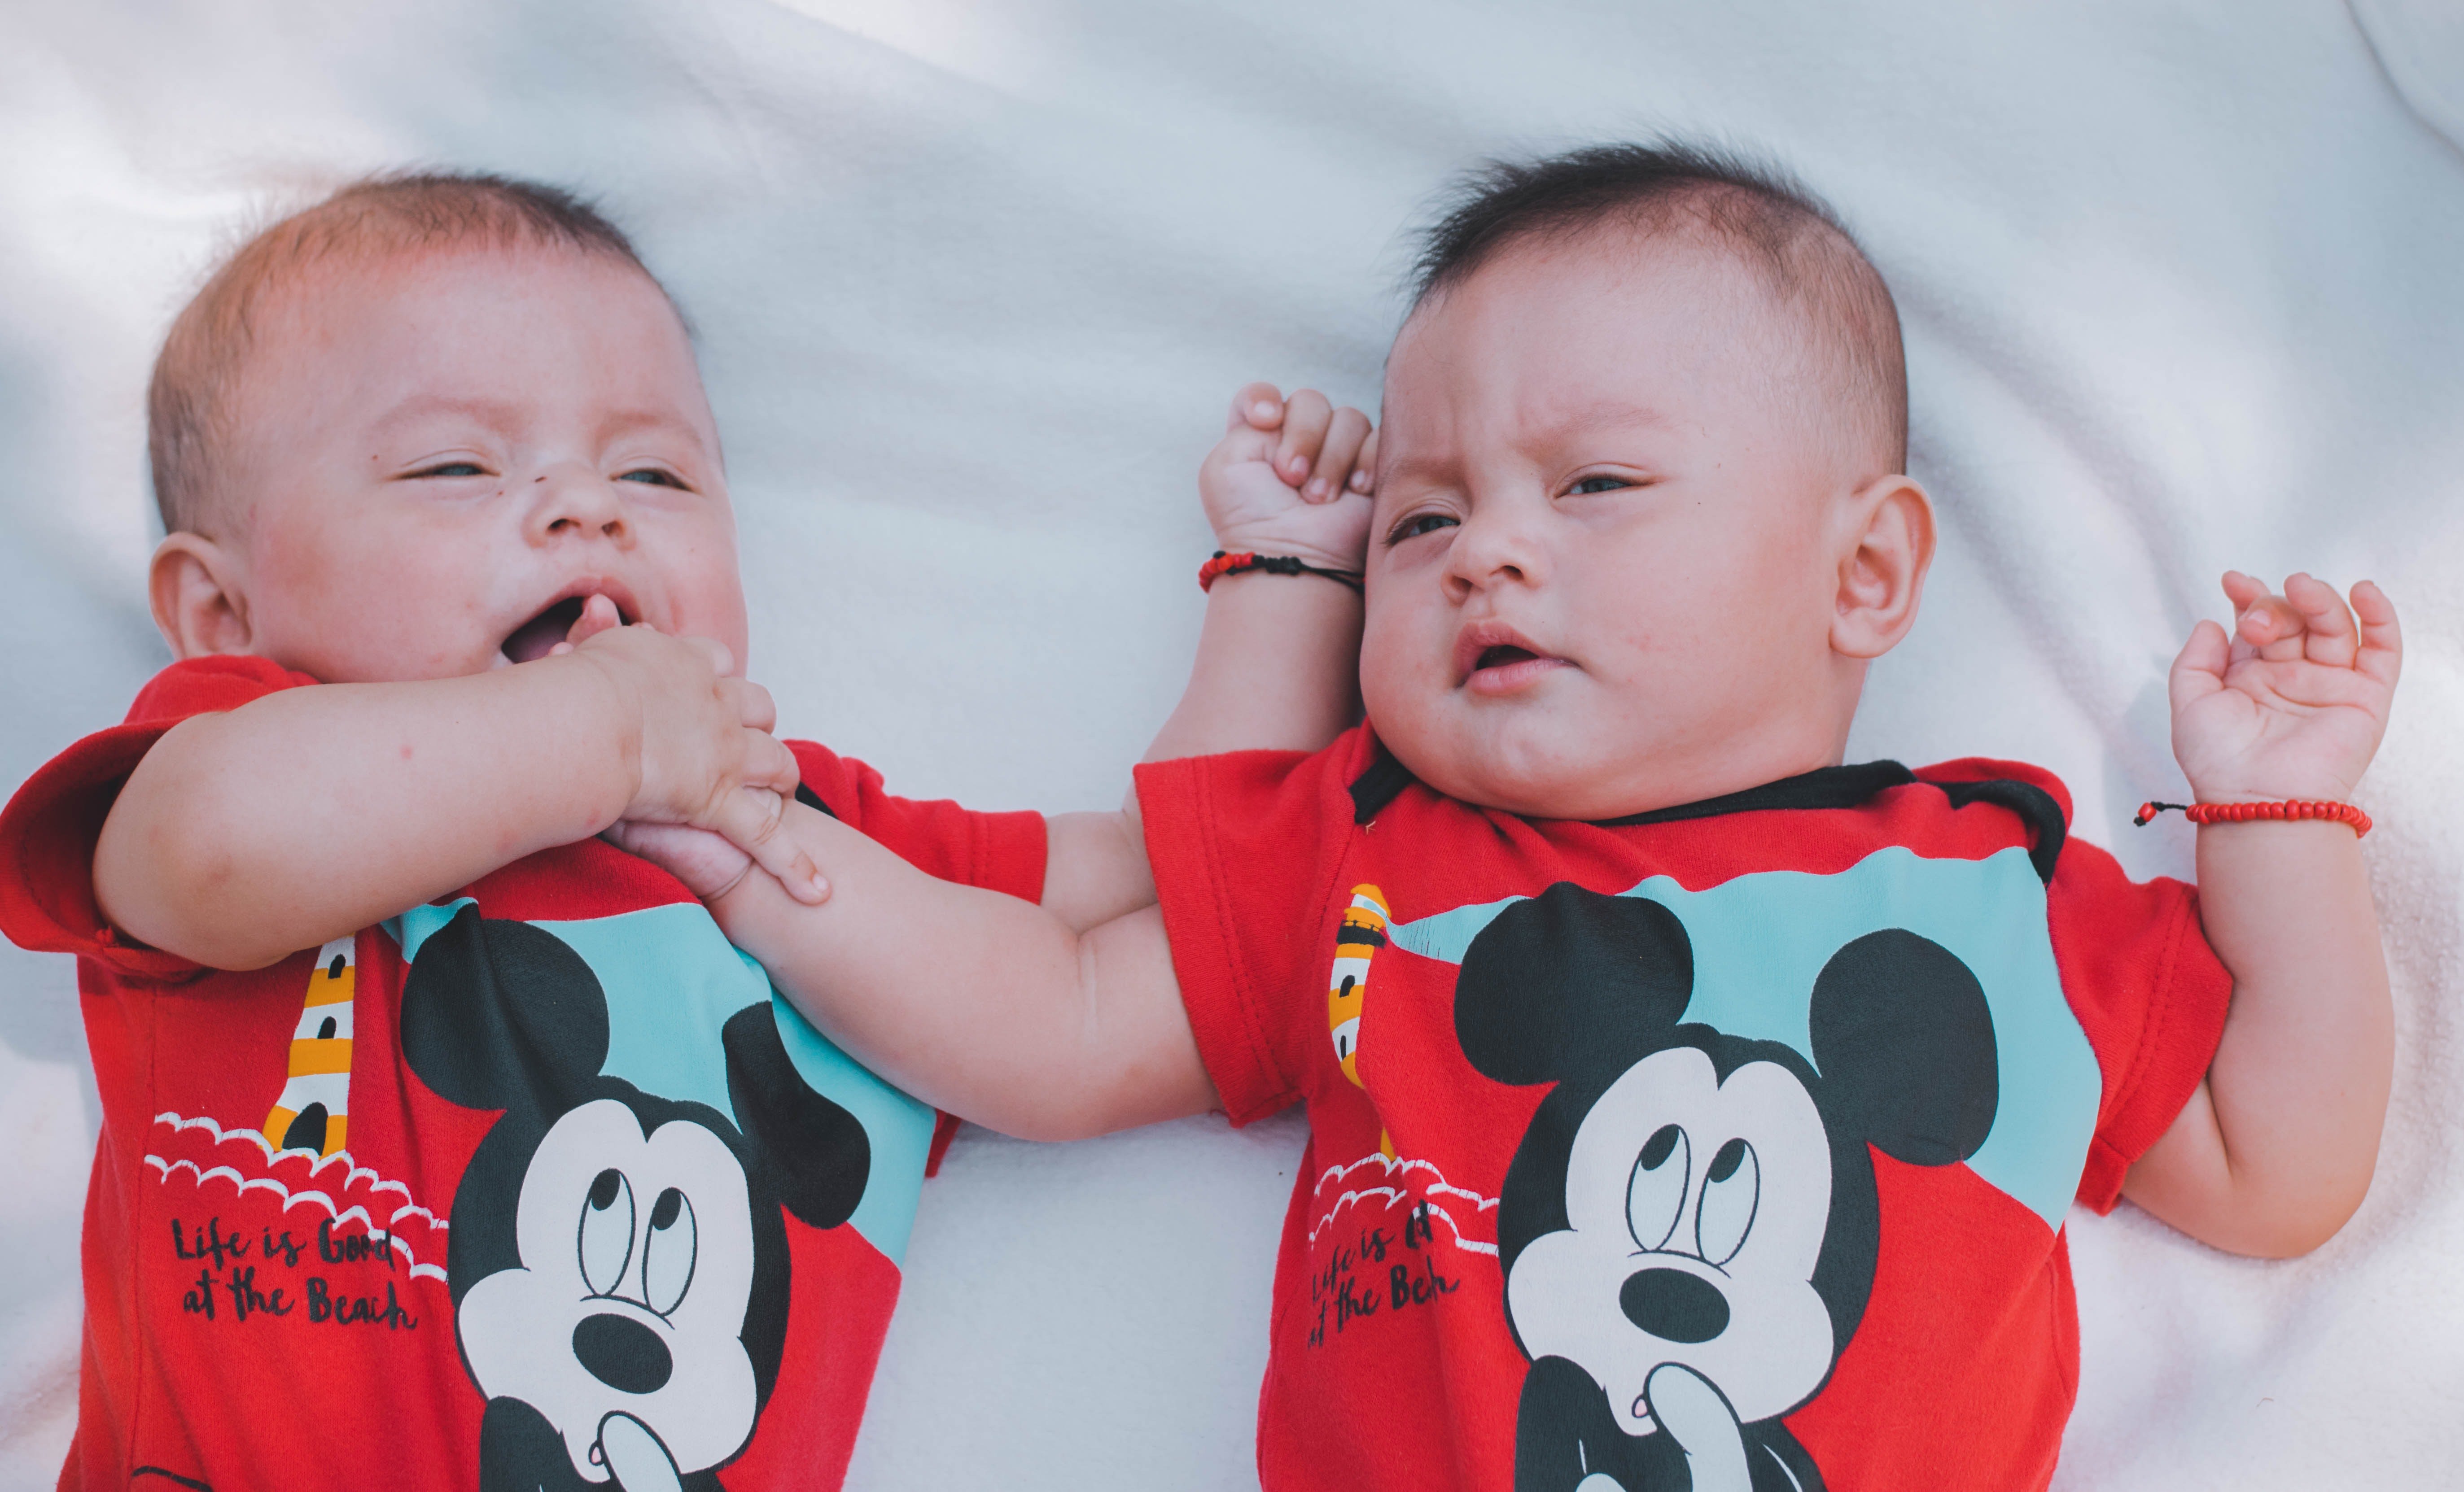 Laylah Sylverstone amassed negative attention whenever neighbors spotted her with her twin babies. | Source: Pexels